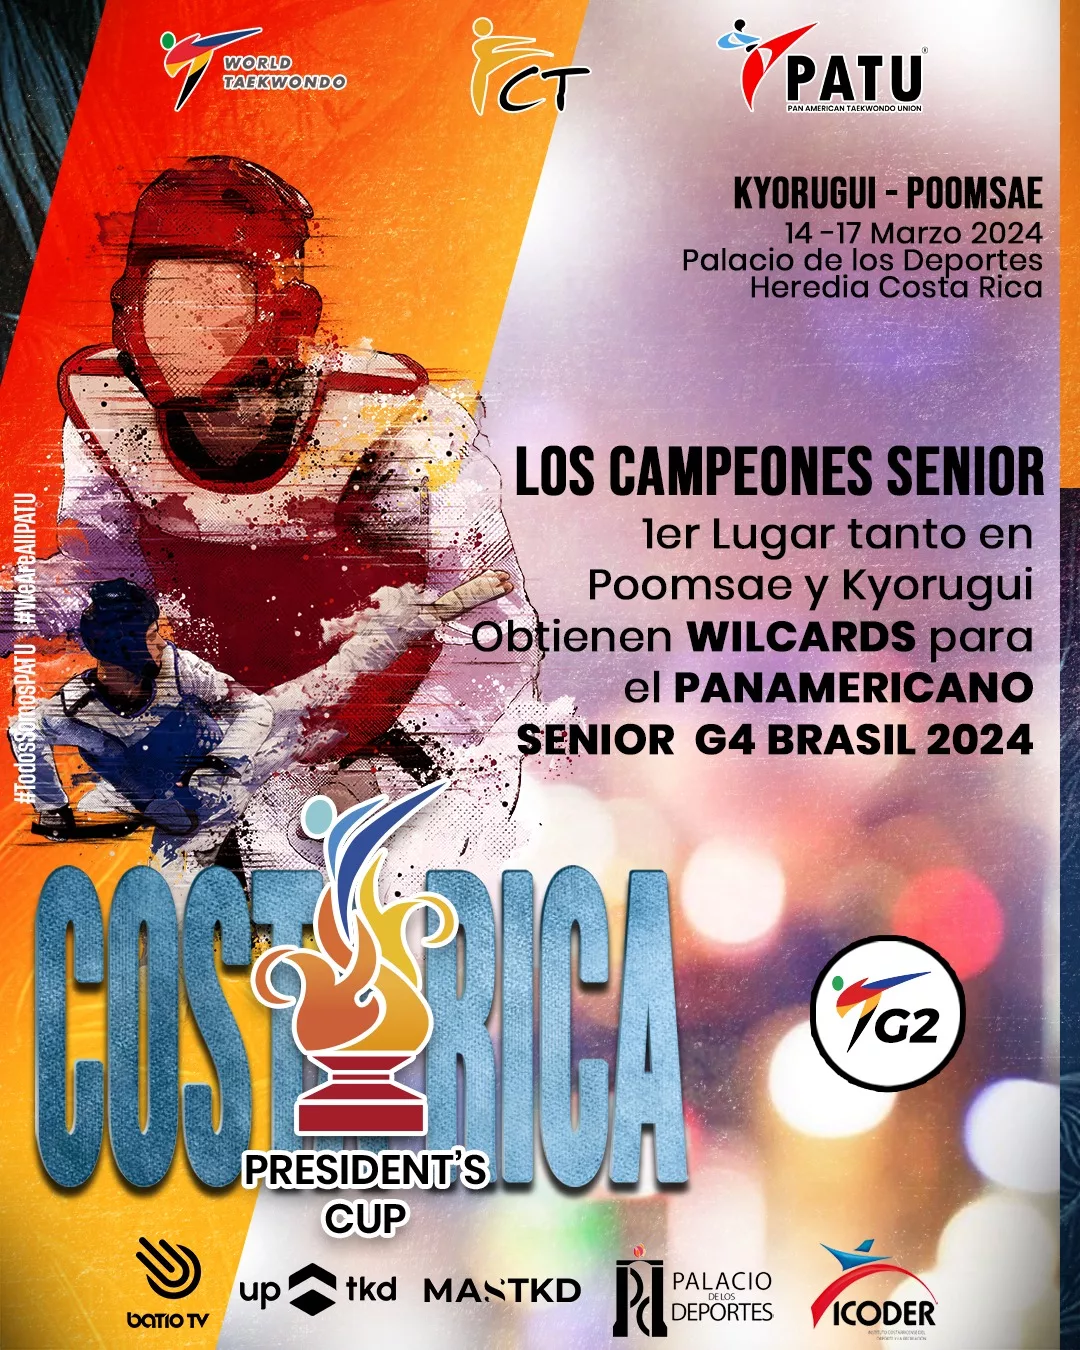 Wild Cards in President's Cup: Direct quotas to the pinnacle of Pan-American Taekwondo events